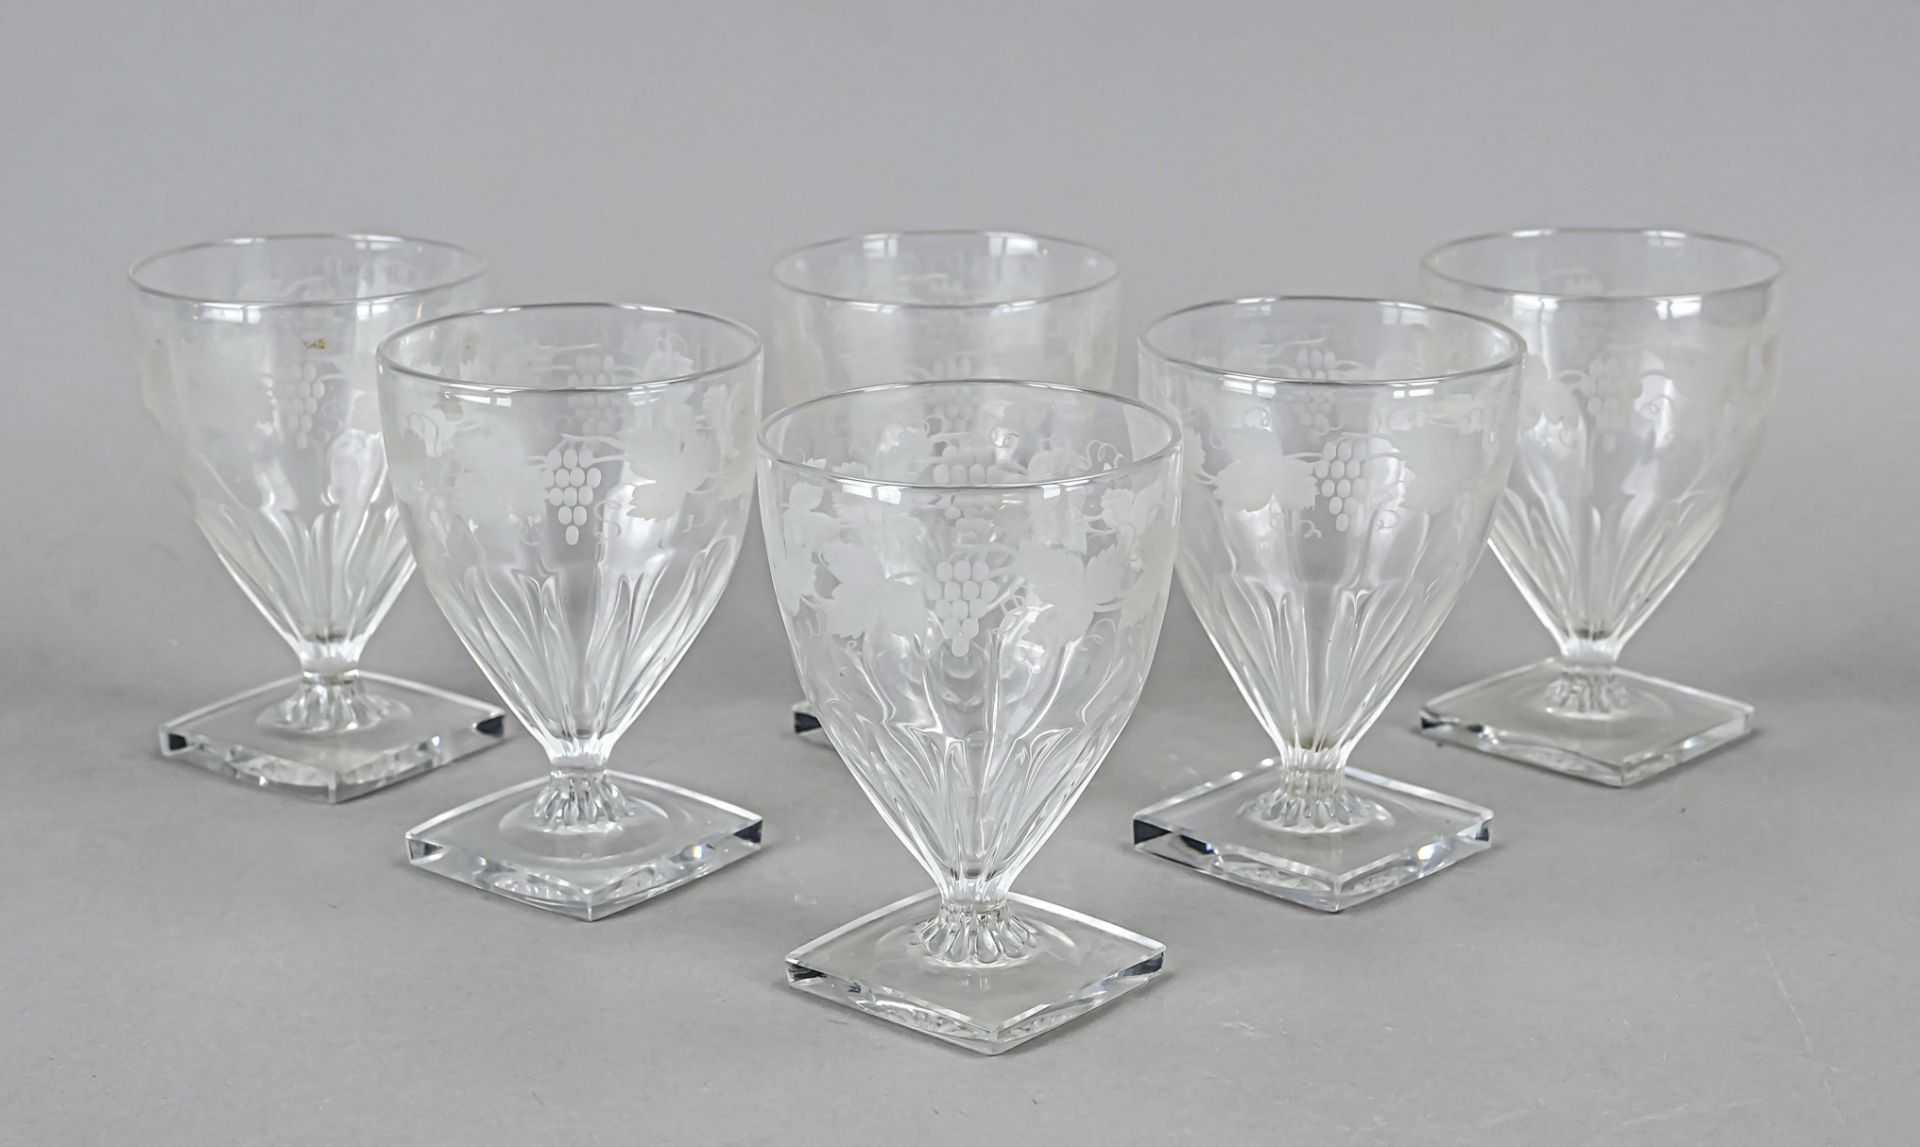 Six wine goblets, early 20th century, square base, short stem merging into a tulip-shaped bowl,